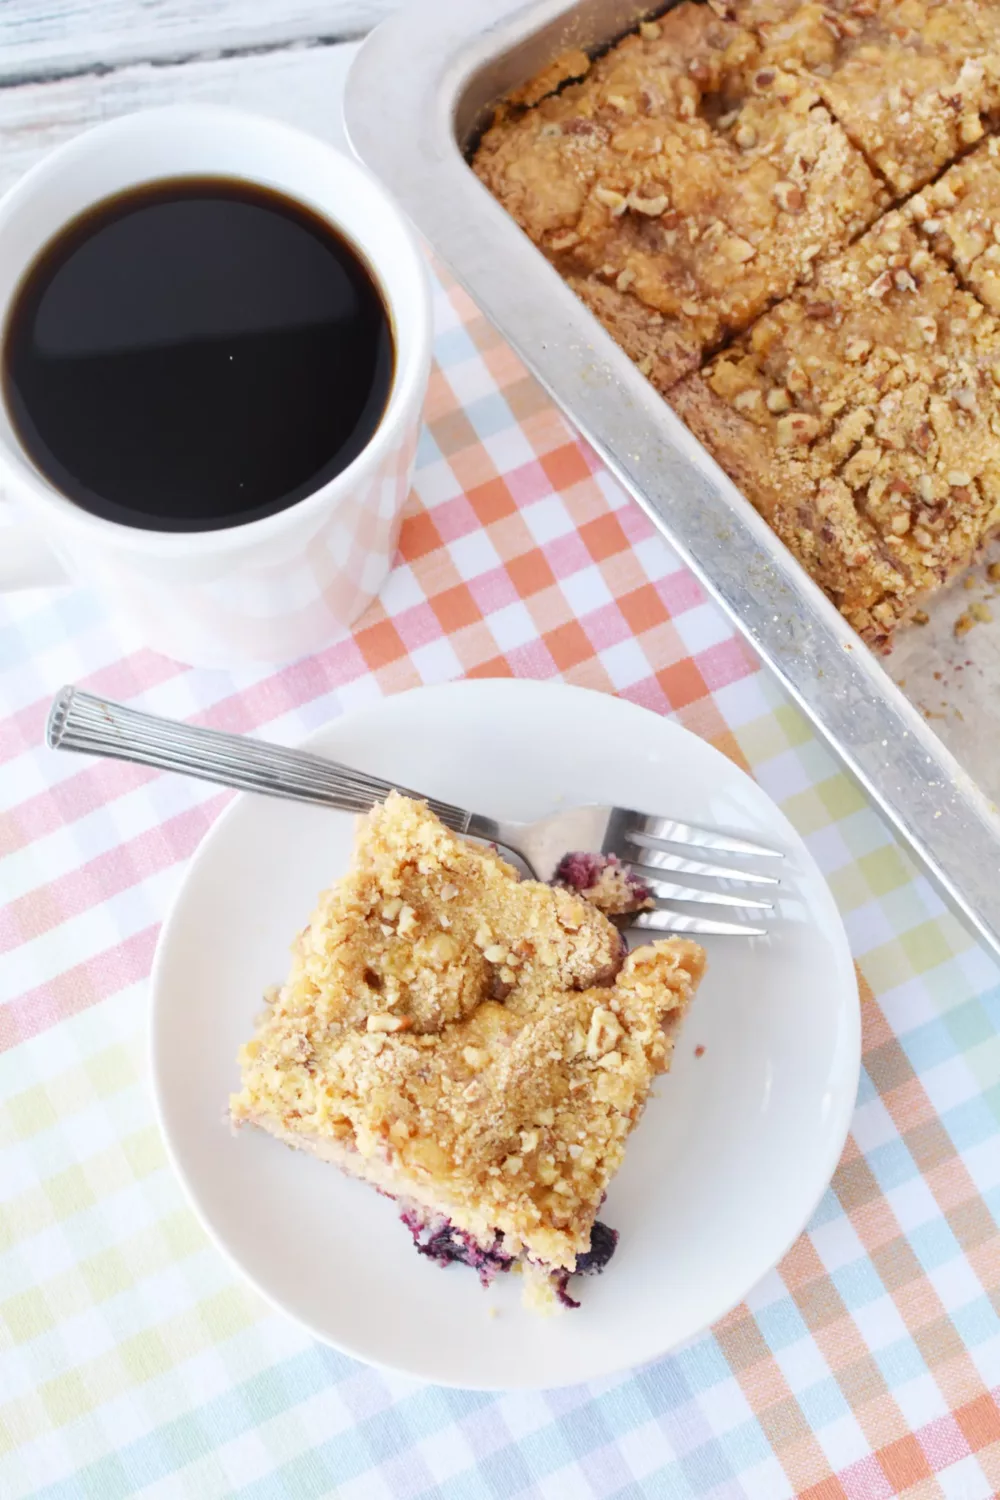 Overhead shot of slice of berry cake next to mug of coffee and baking dish with more cake.